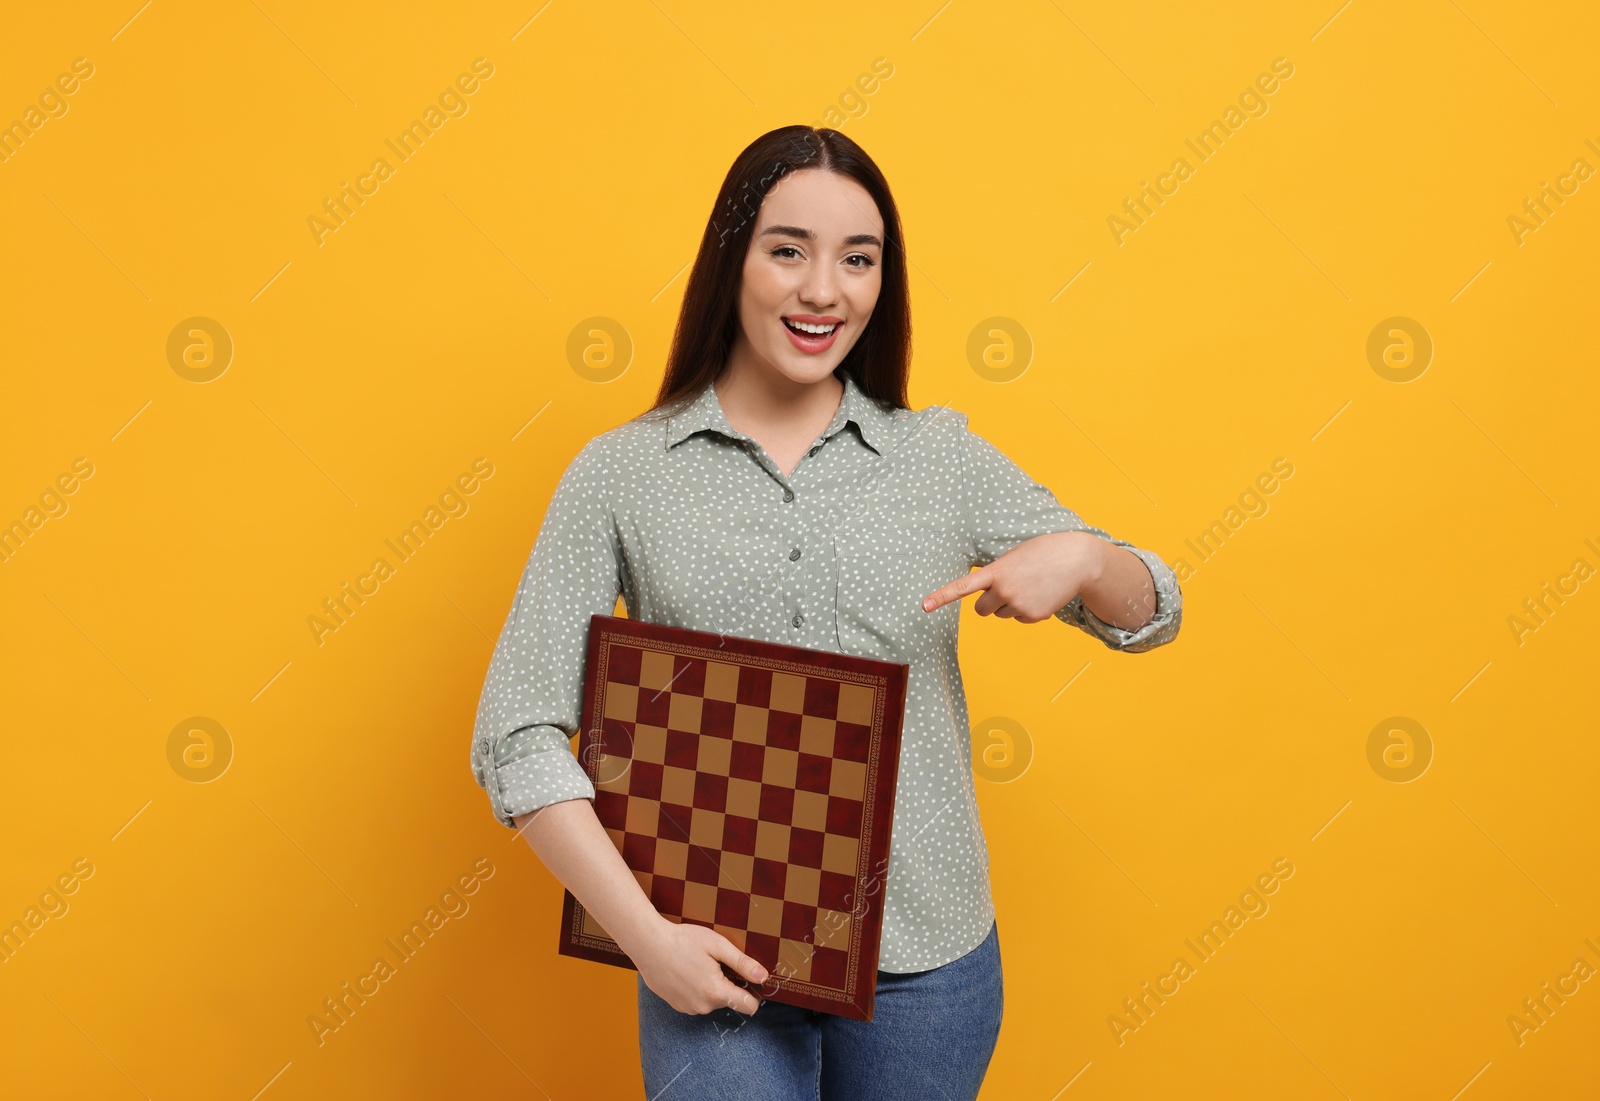 Photo of Happy woman showing chessboard on orange background